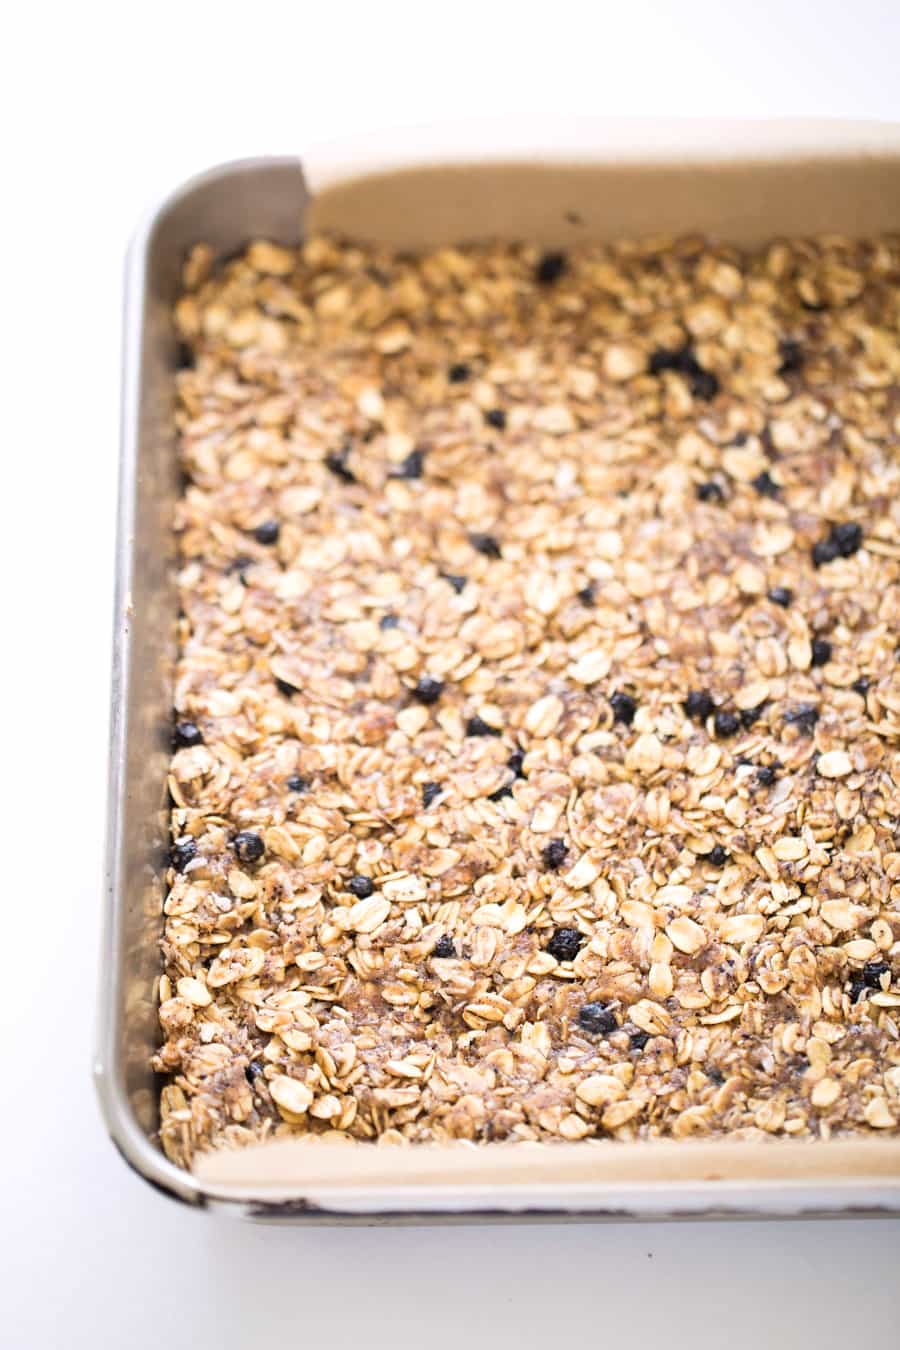 These NO BAKE Acai Granola Bars are a simple, DIY snack that is naturally sweet, vegan and SUPER healthy!